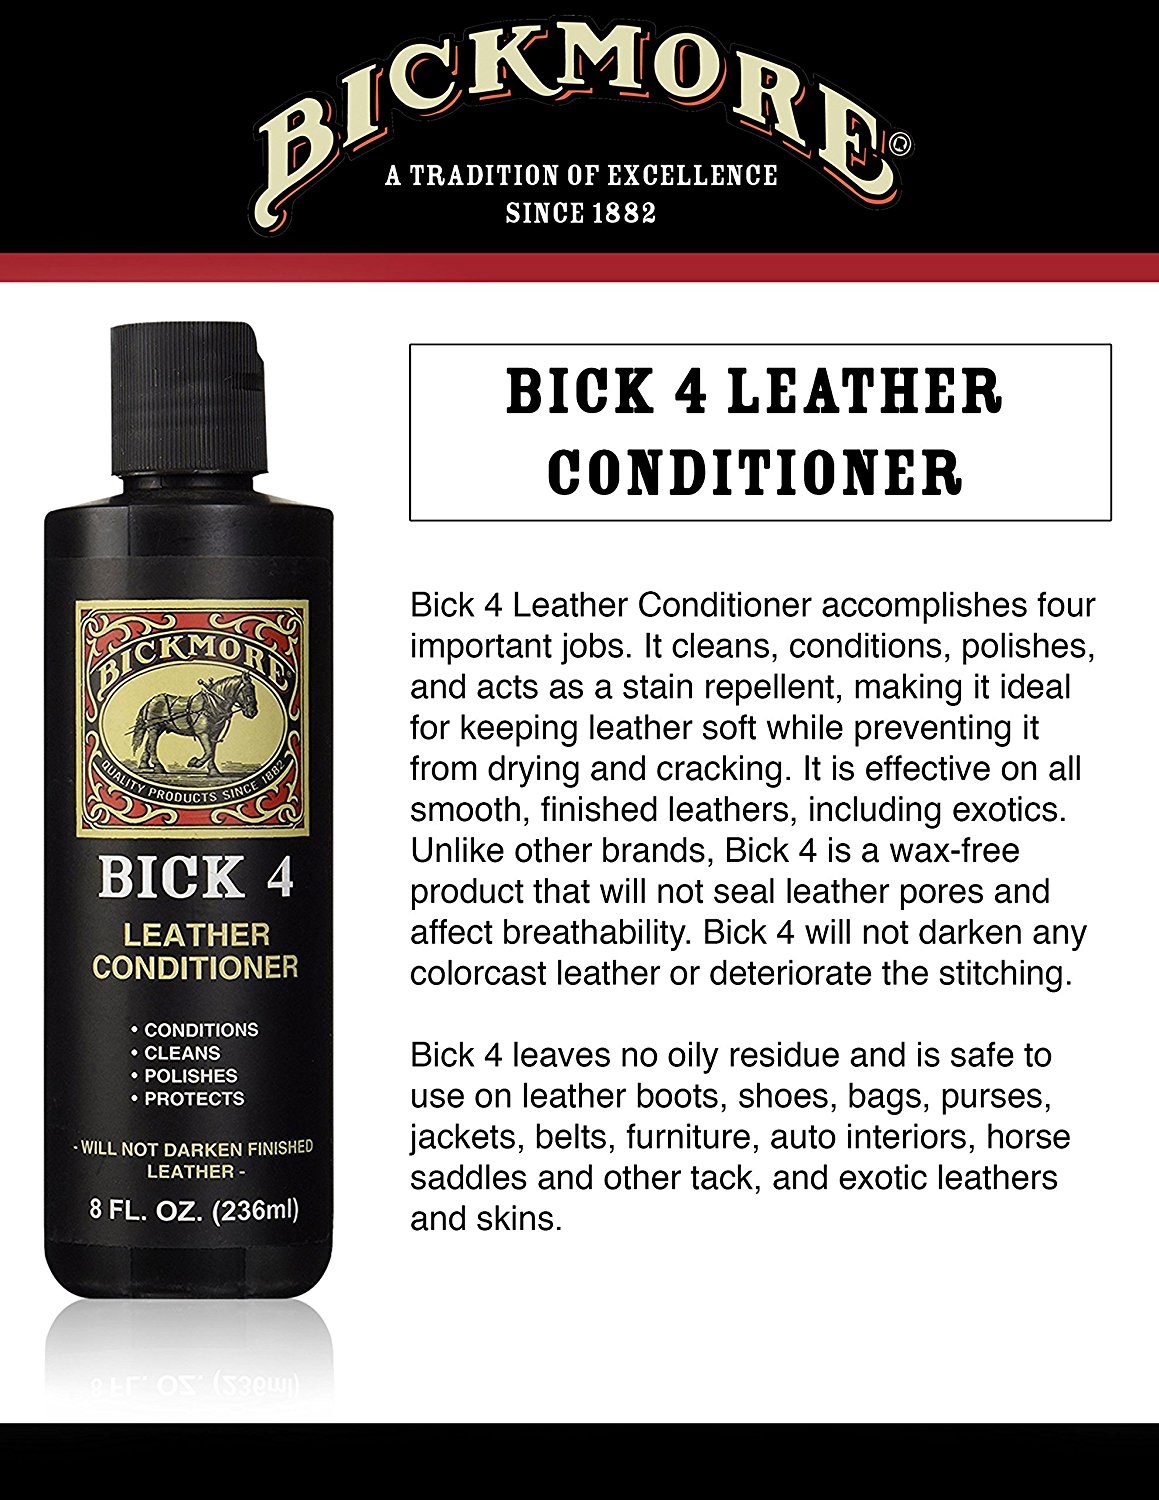 Bickmore Bick 4 Leather Conditioner - Best Since 1882 - Cleaner & Conditioner - Restore Polish & Protect All Smooth Finished Leathers